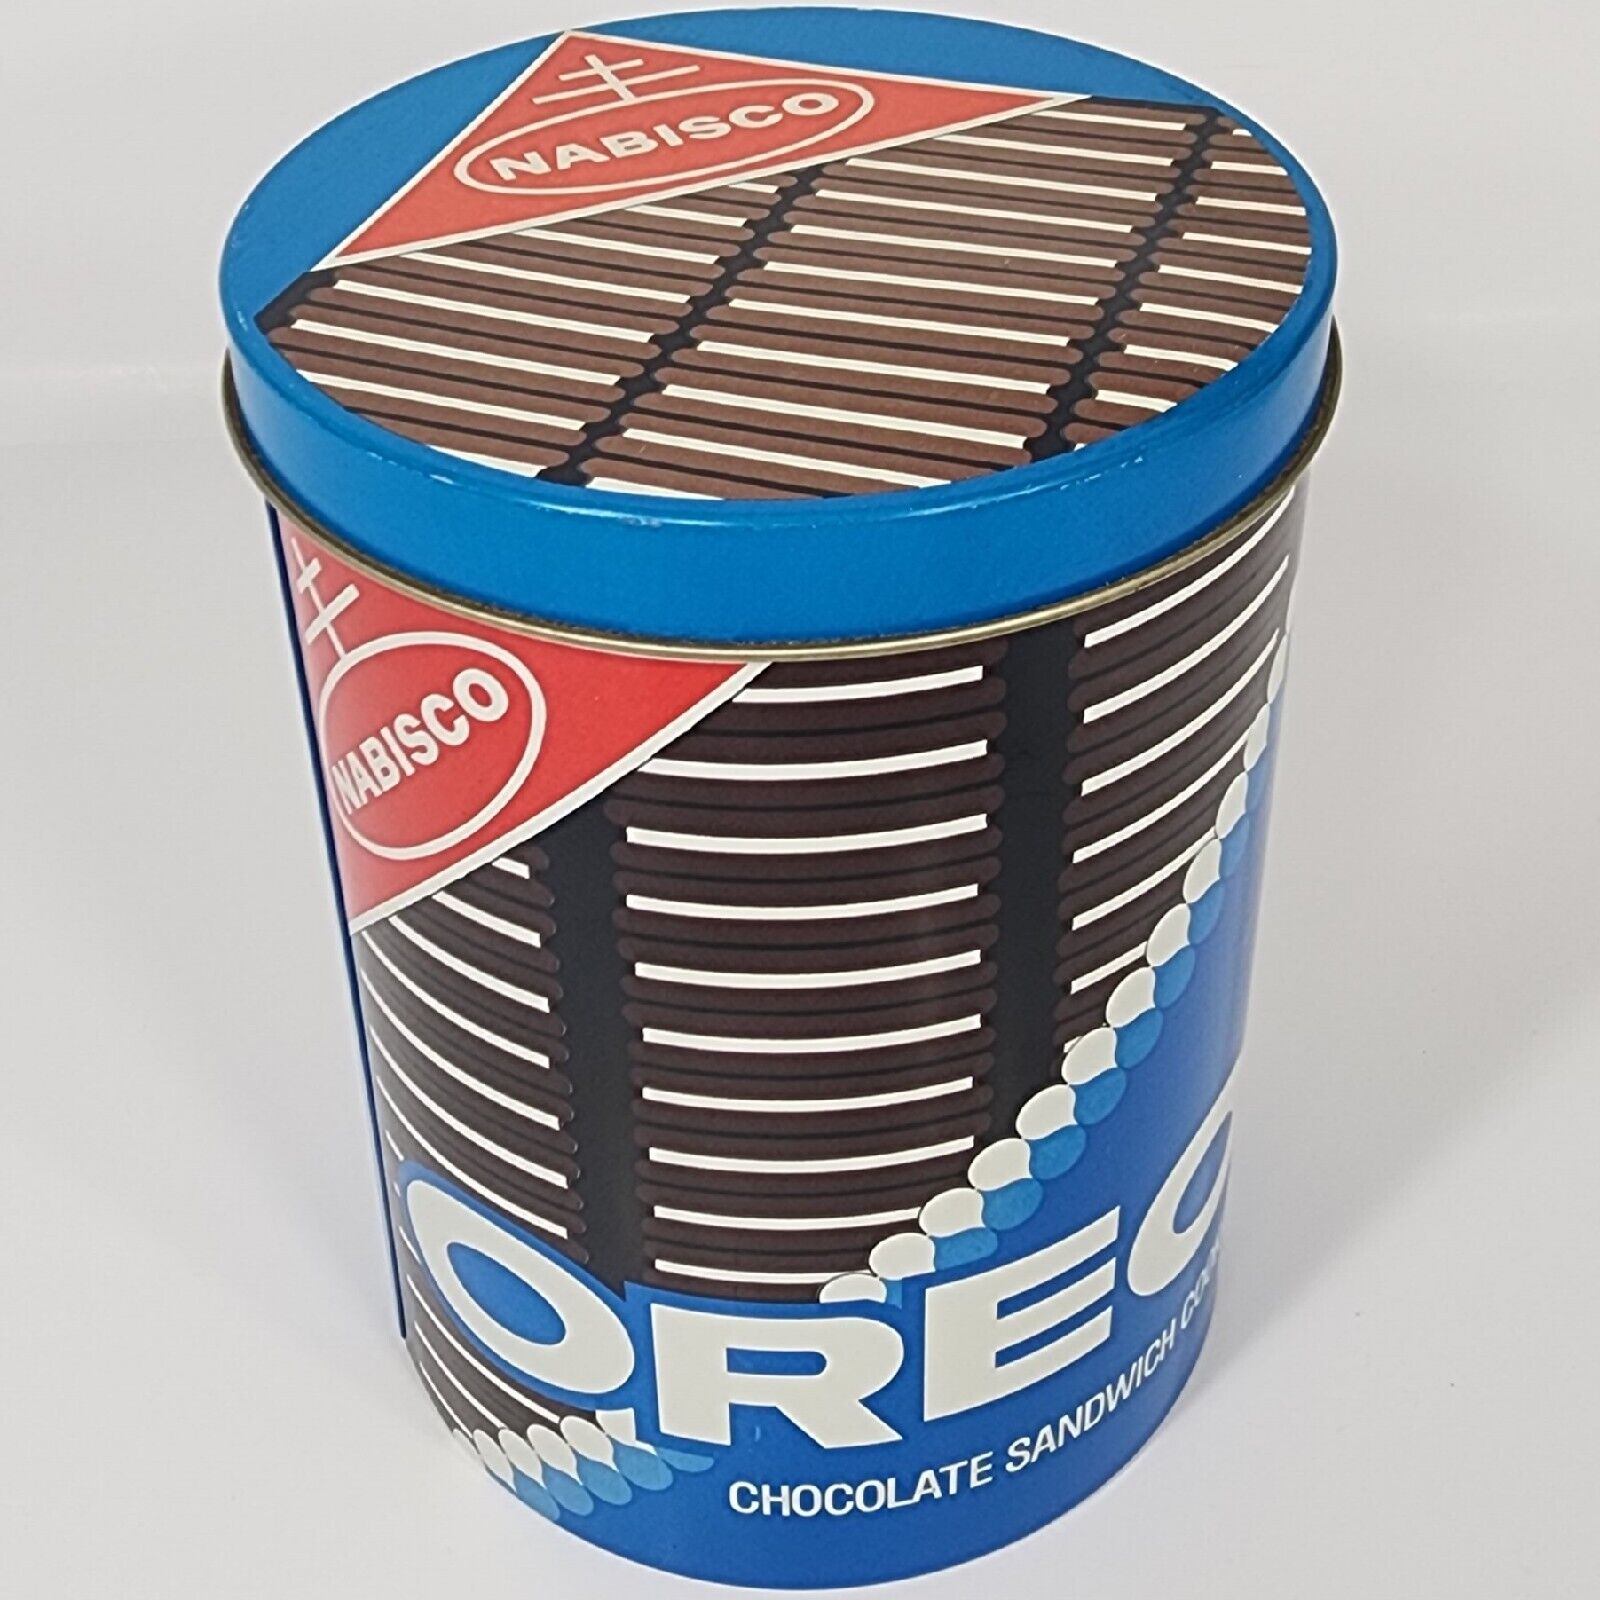 Vintage Nabisco Oreo Tin Cookies Jar Can Container Chocolate Sandwich Chein Co